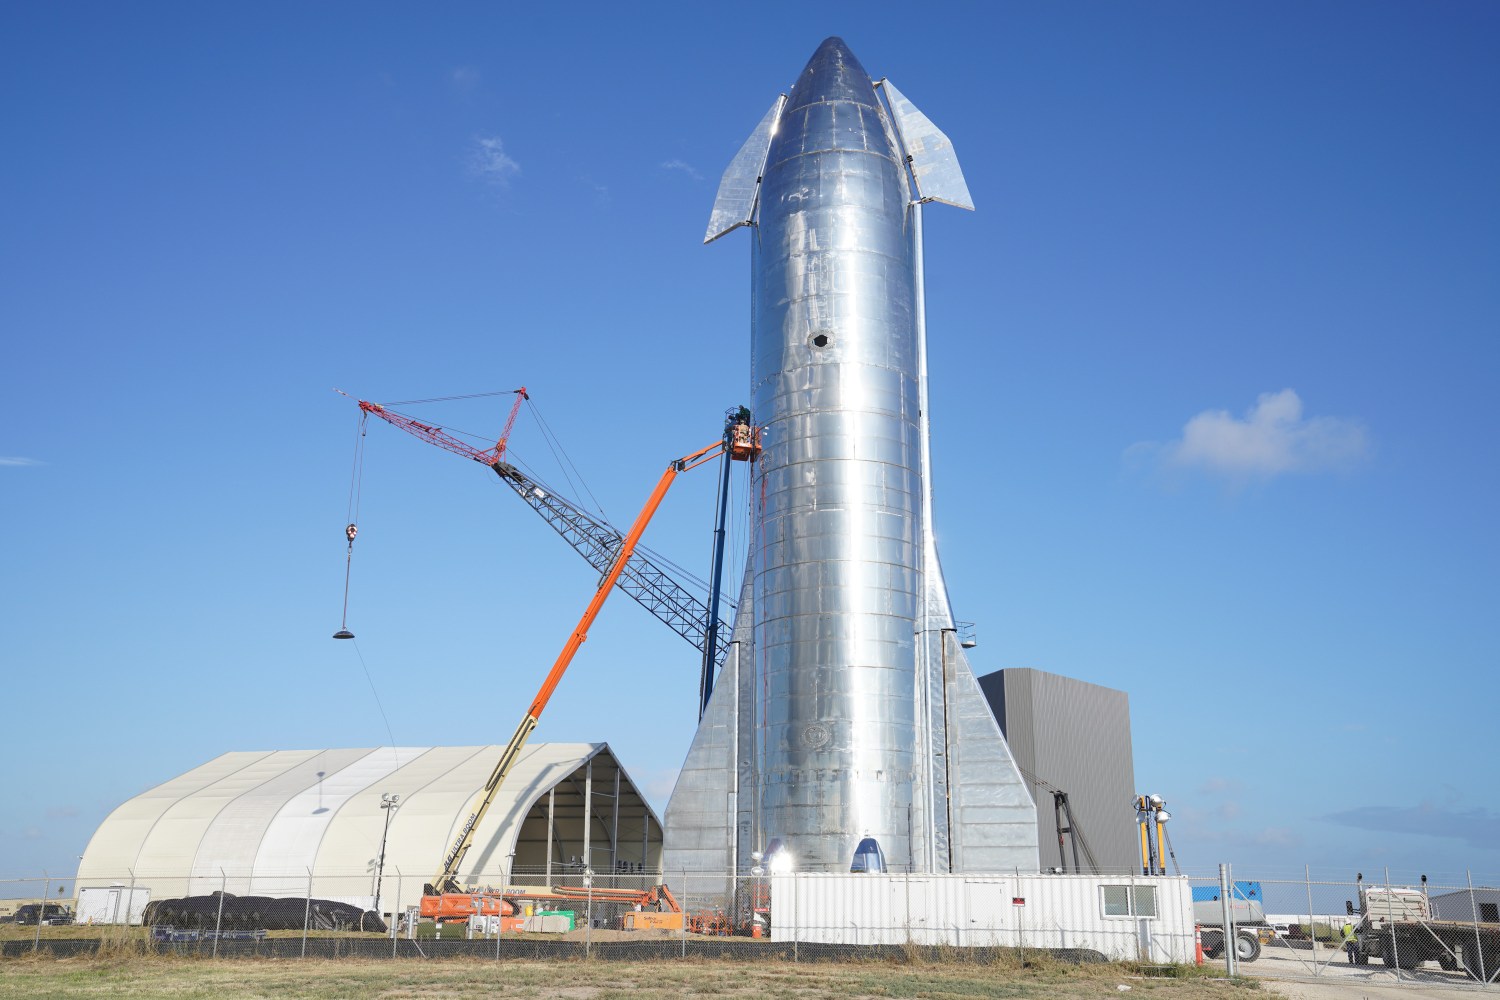 SpaceX’s Starship Mk1 spacecraft prototype in pictures - Tent of Tech